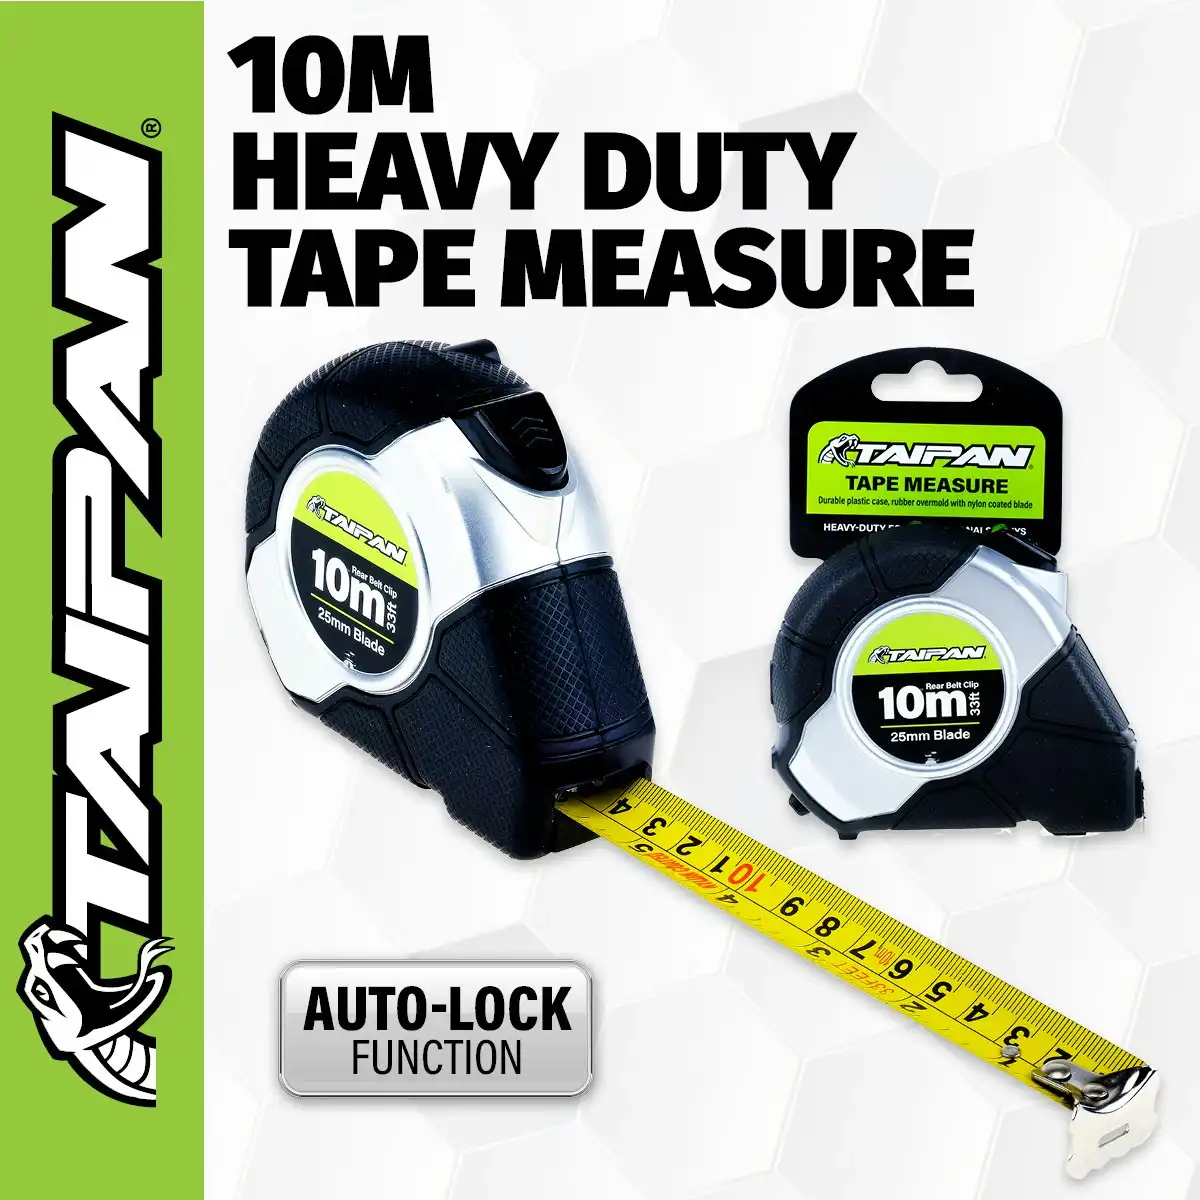 Taipan 10m Tape Measure Auto Lock Function Shock Absorbent Rubber Case